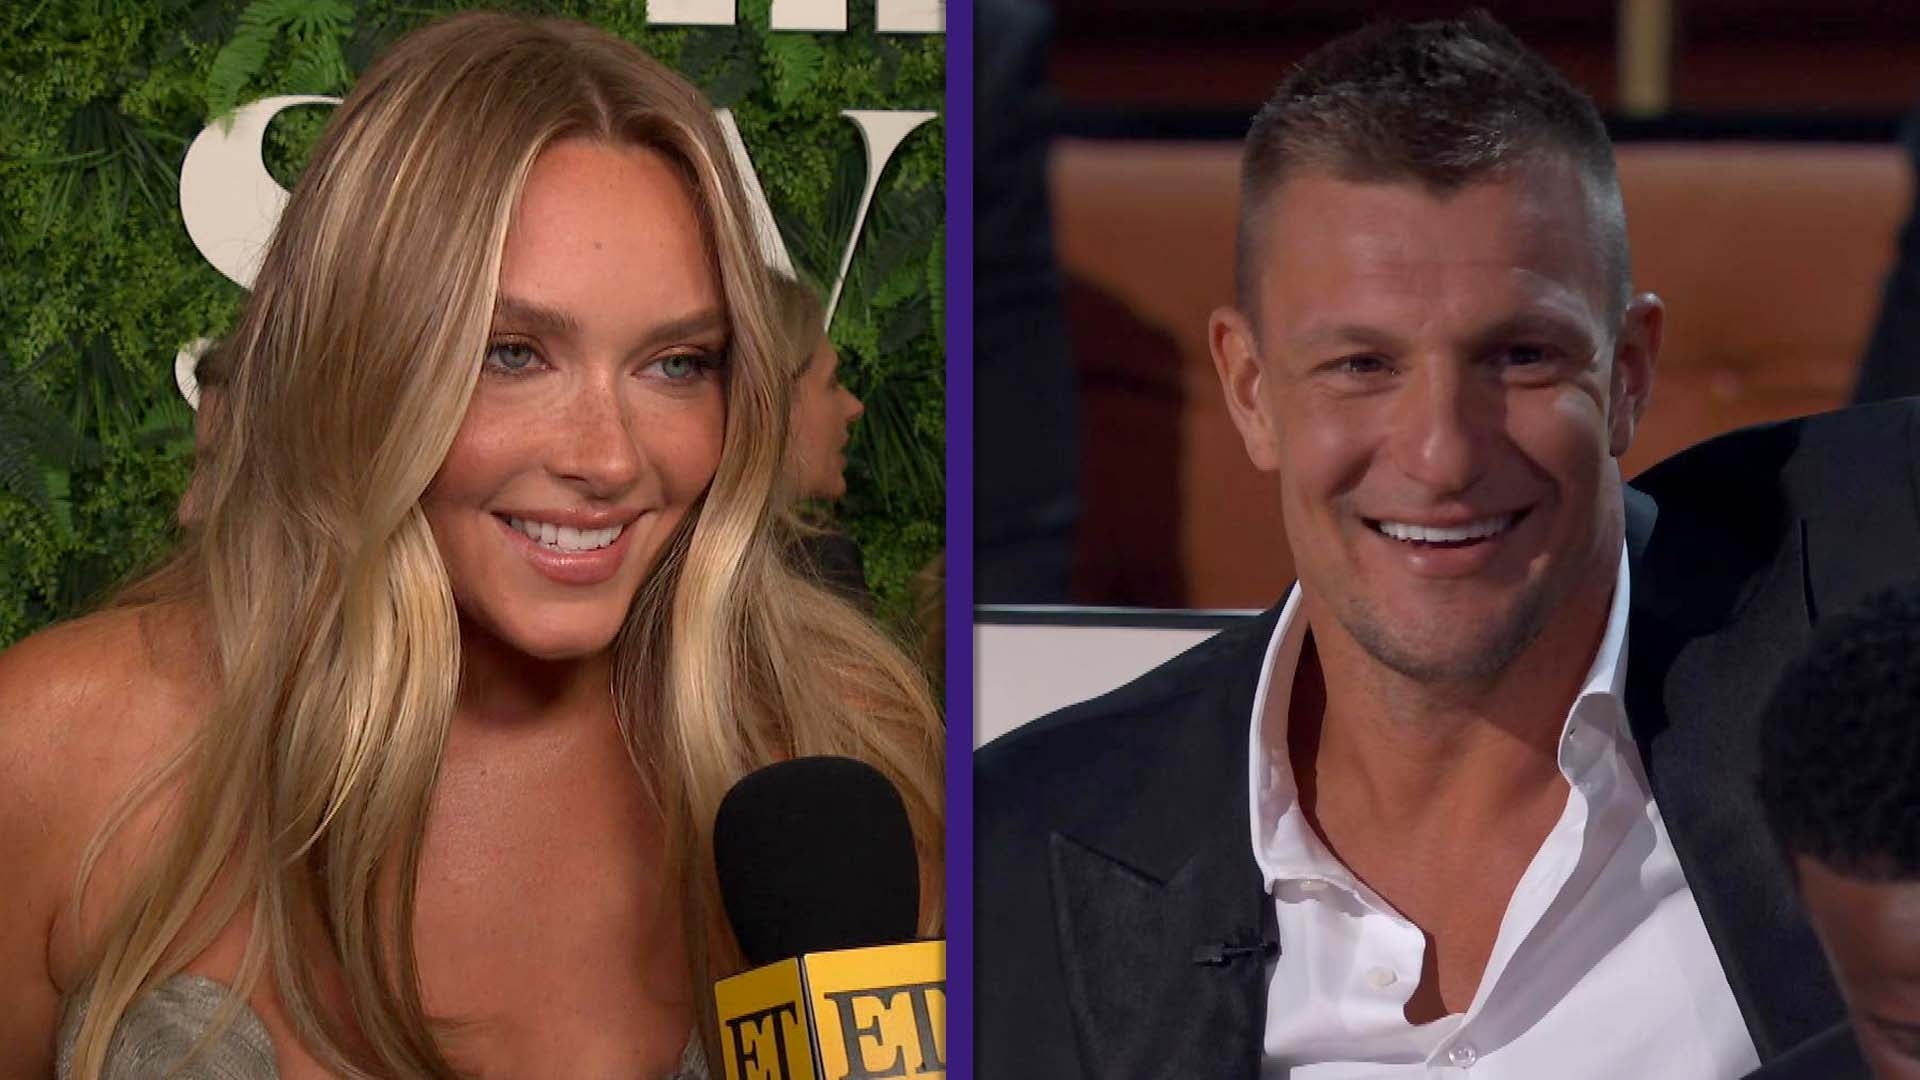 Camille Kostek Reacts to Gronk Getting 'Burned' at Tom Brady Roast (Exclusive)